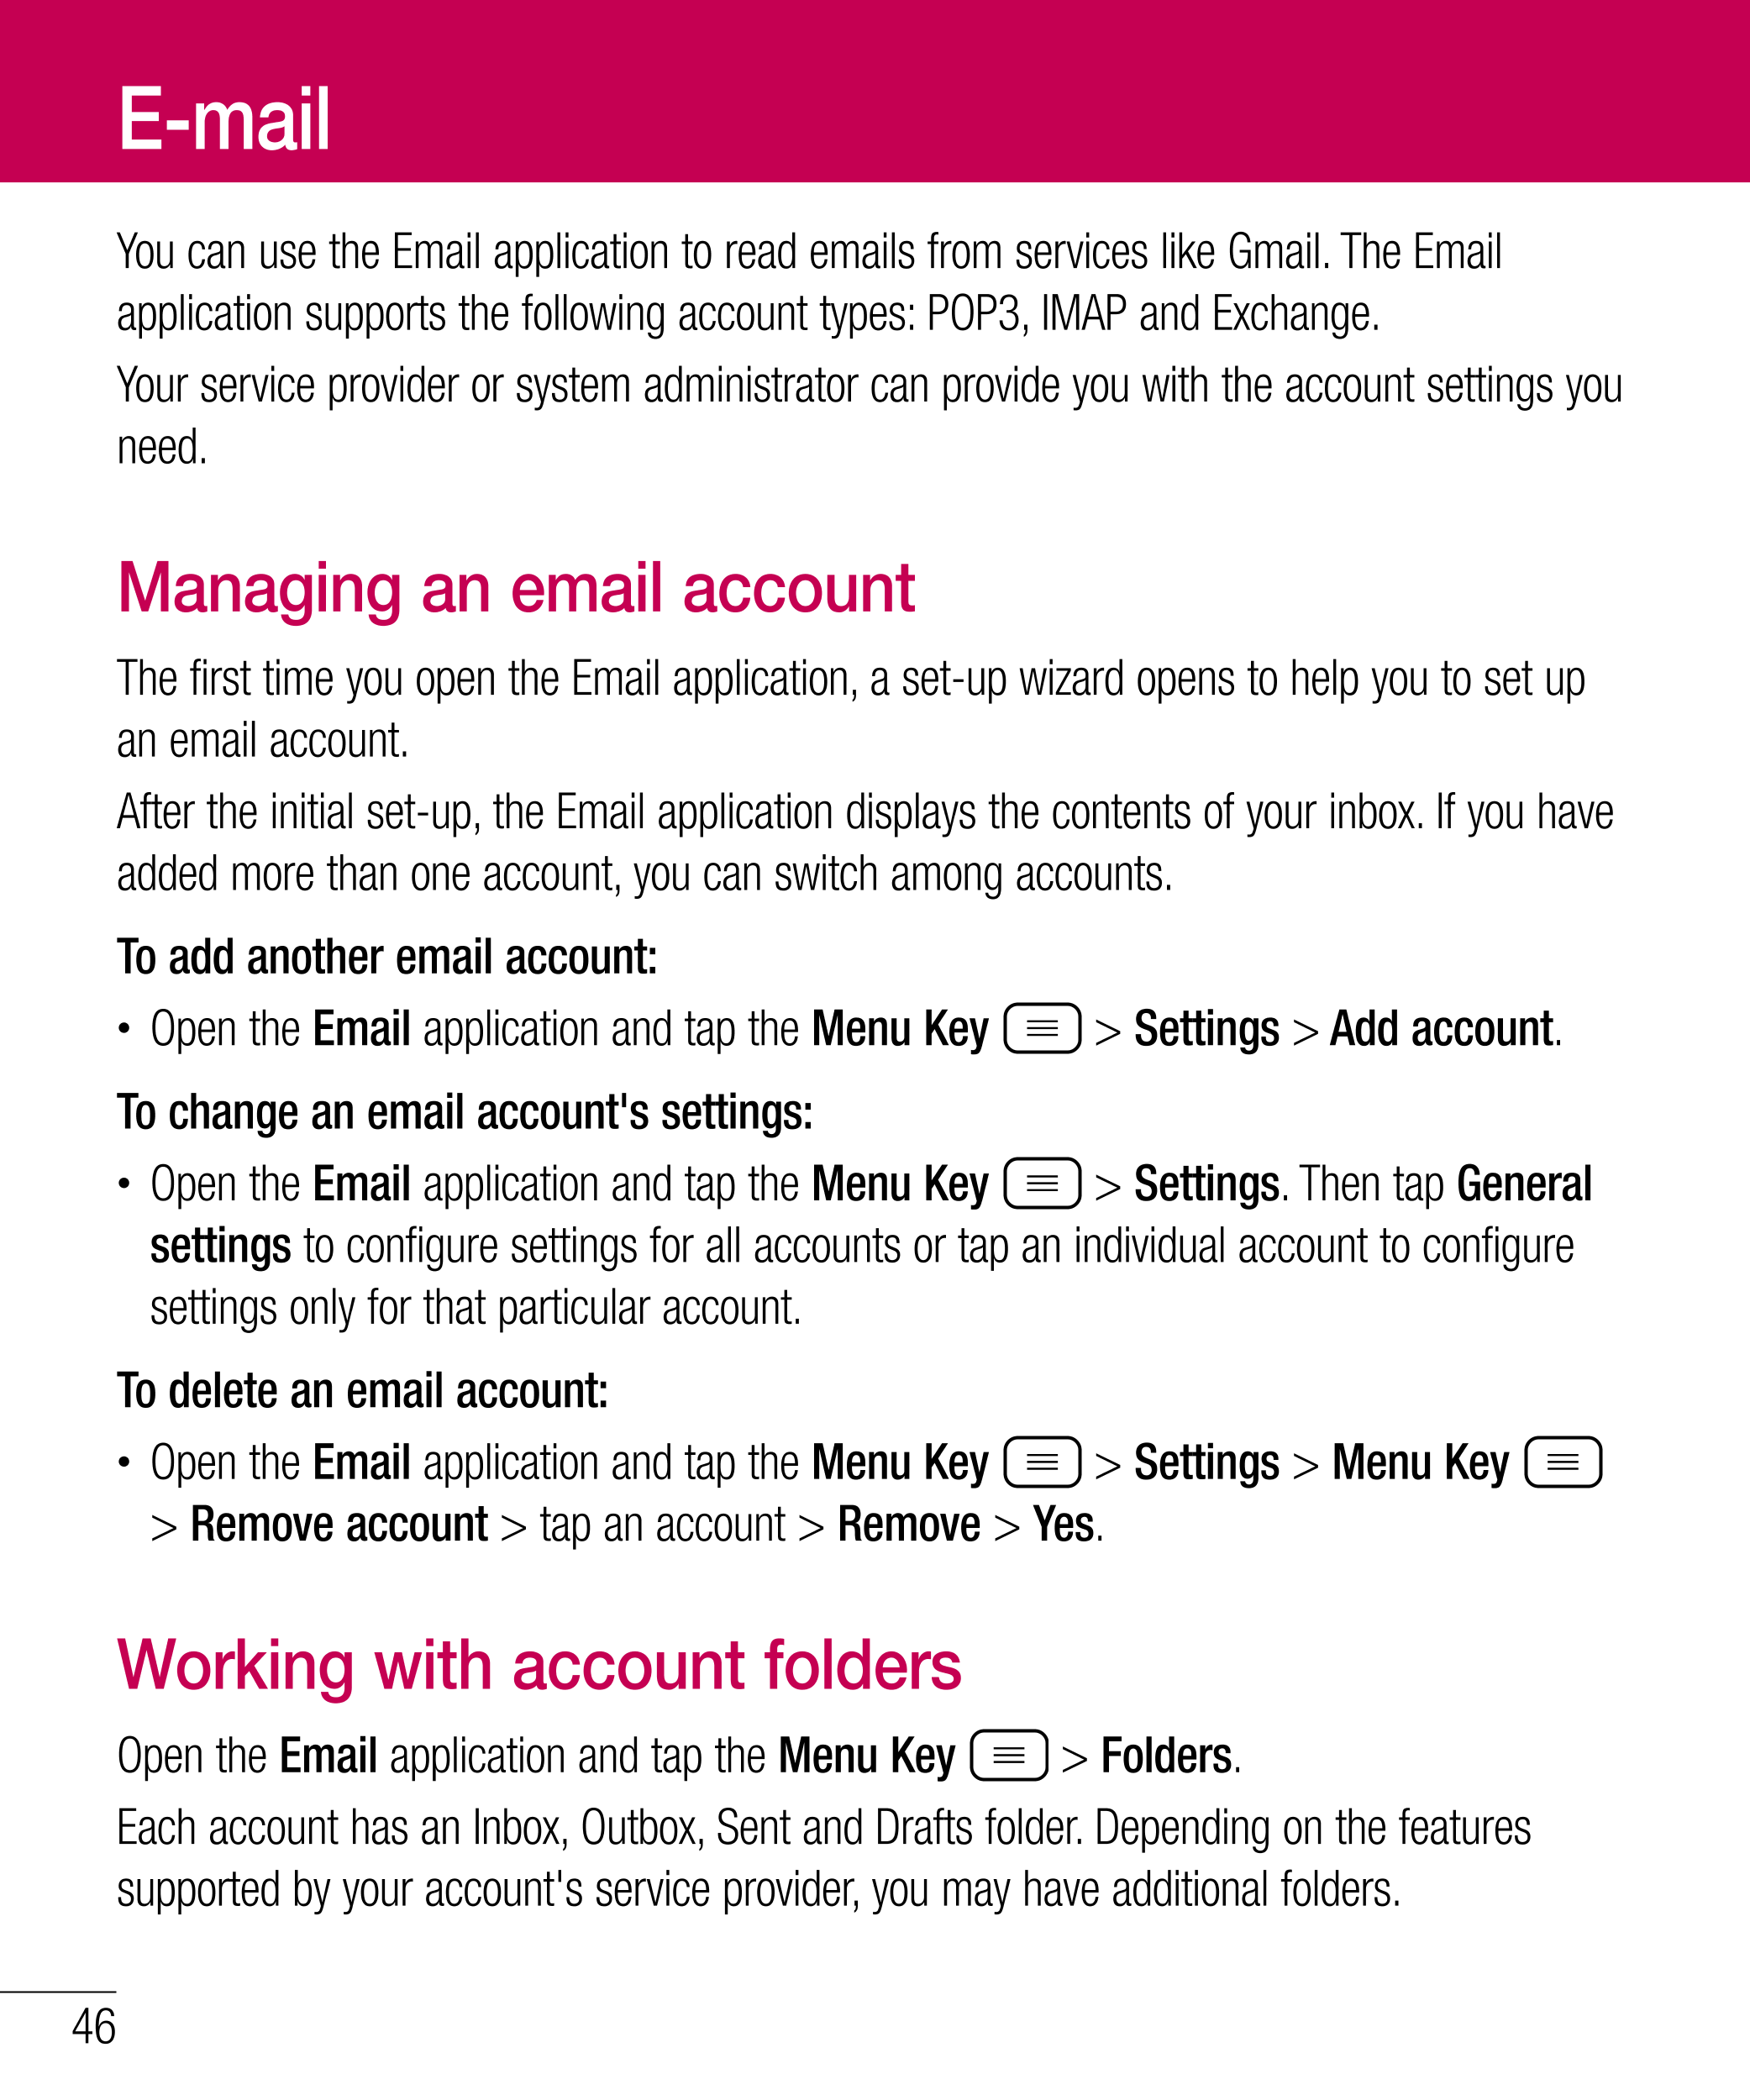 E-mail
You can use the Email application to read emails from services like Gmail. The Email 
application supports the following 